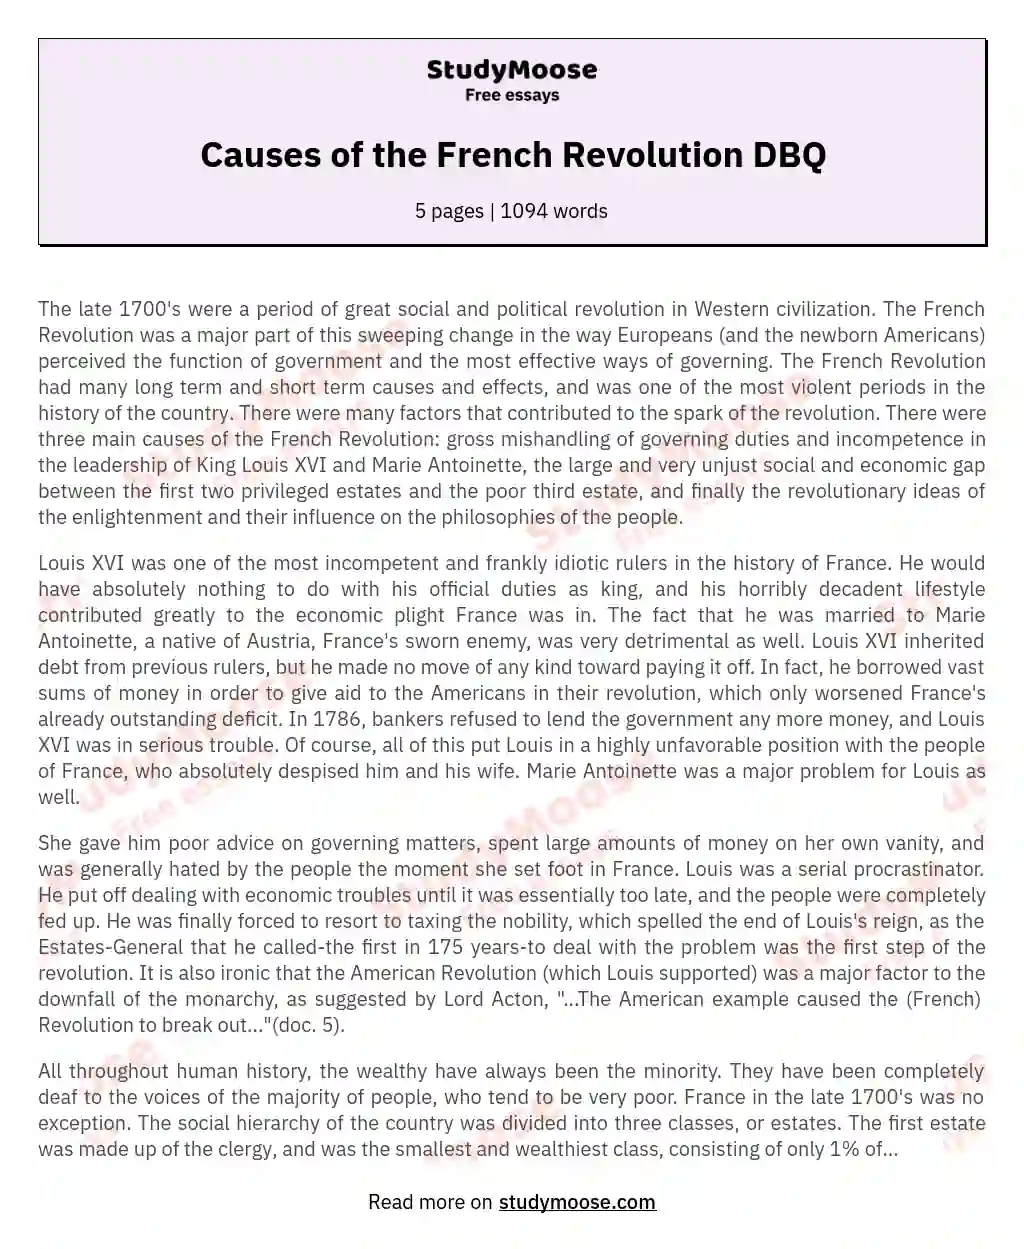 Causes of the French Revolution DBQ essay